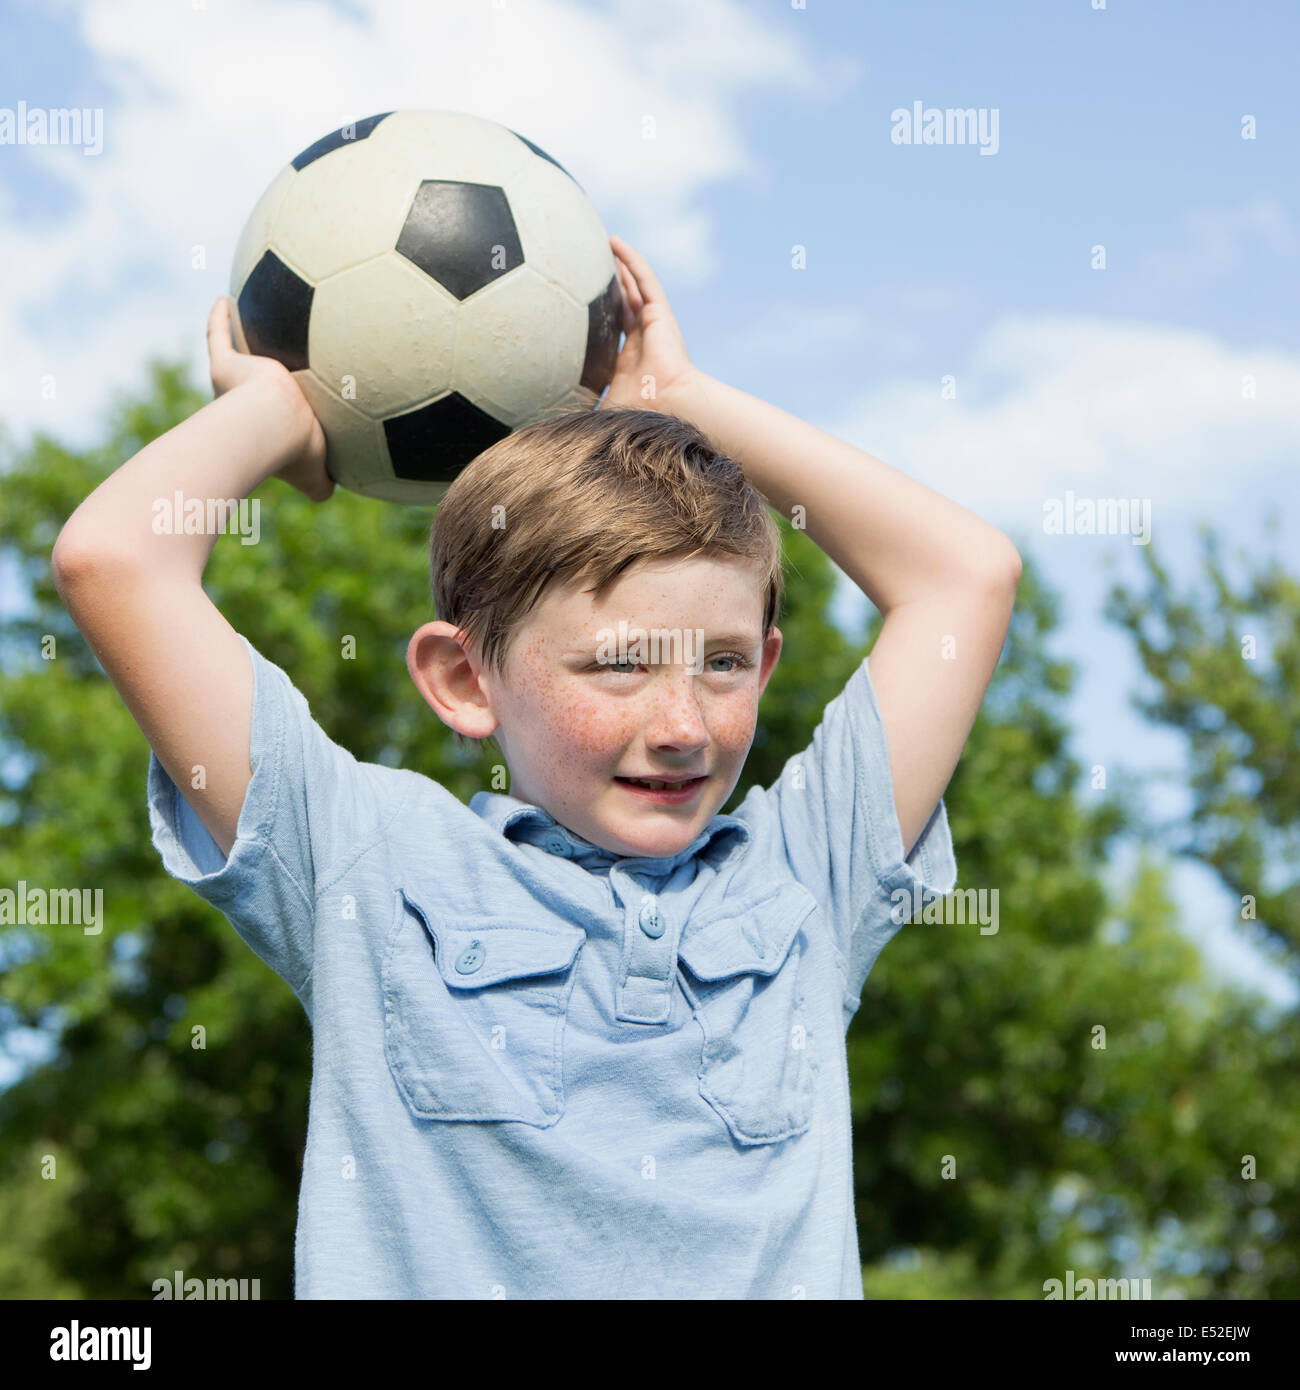 A young boy holding a soccer ball above his head. Stock Photo